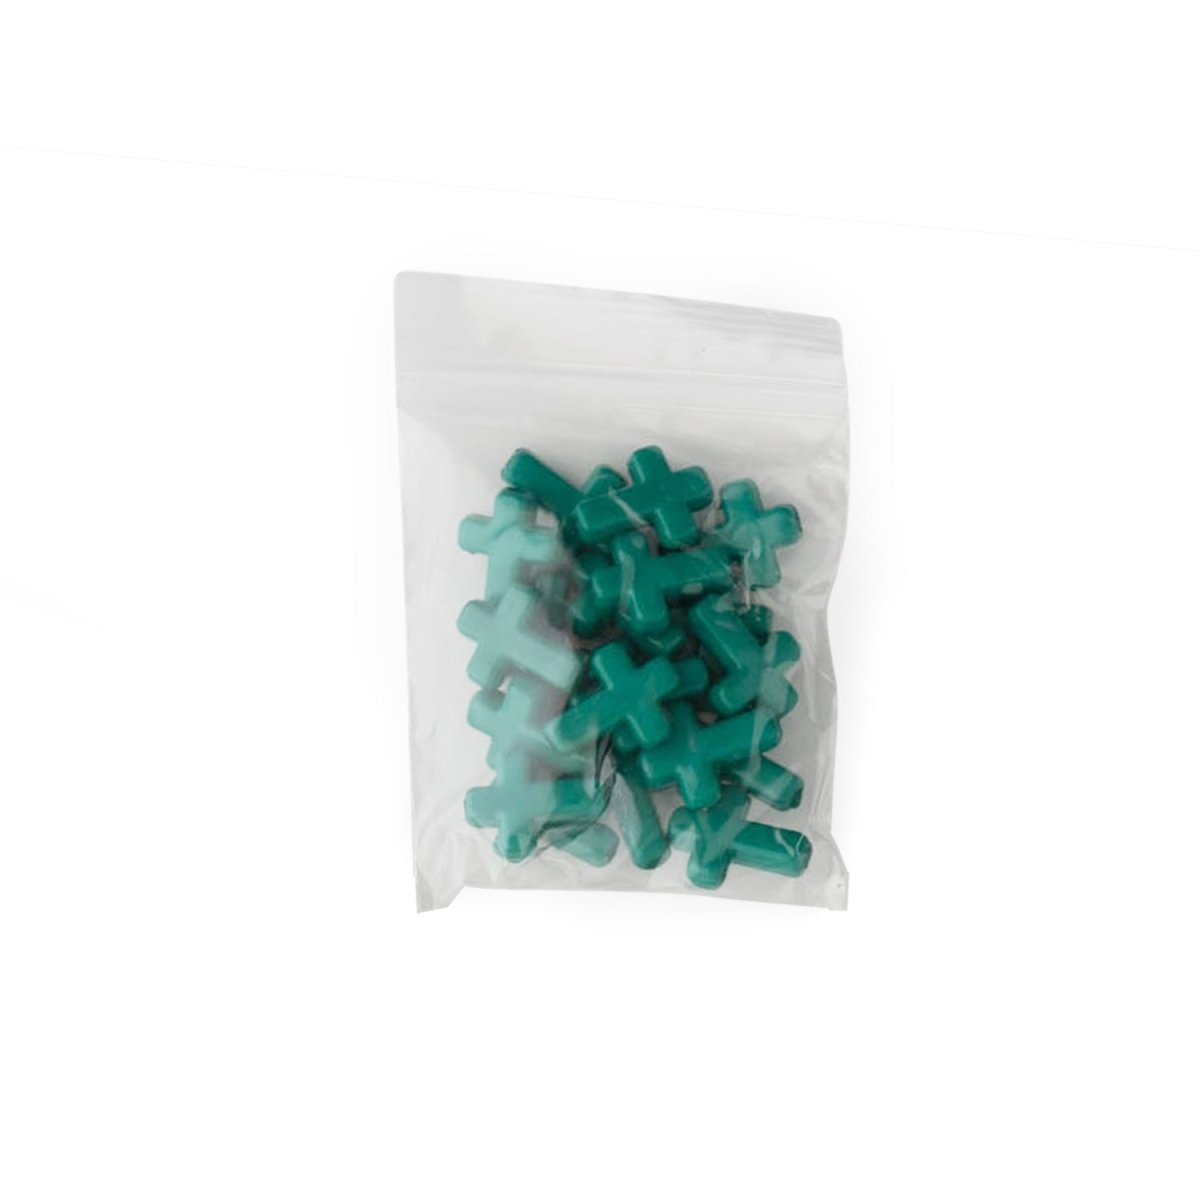 Accent Beads Crosses Teal from Cara & Co Craft Supply